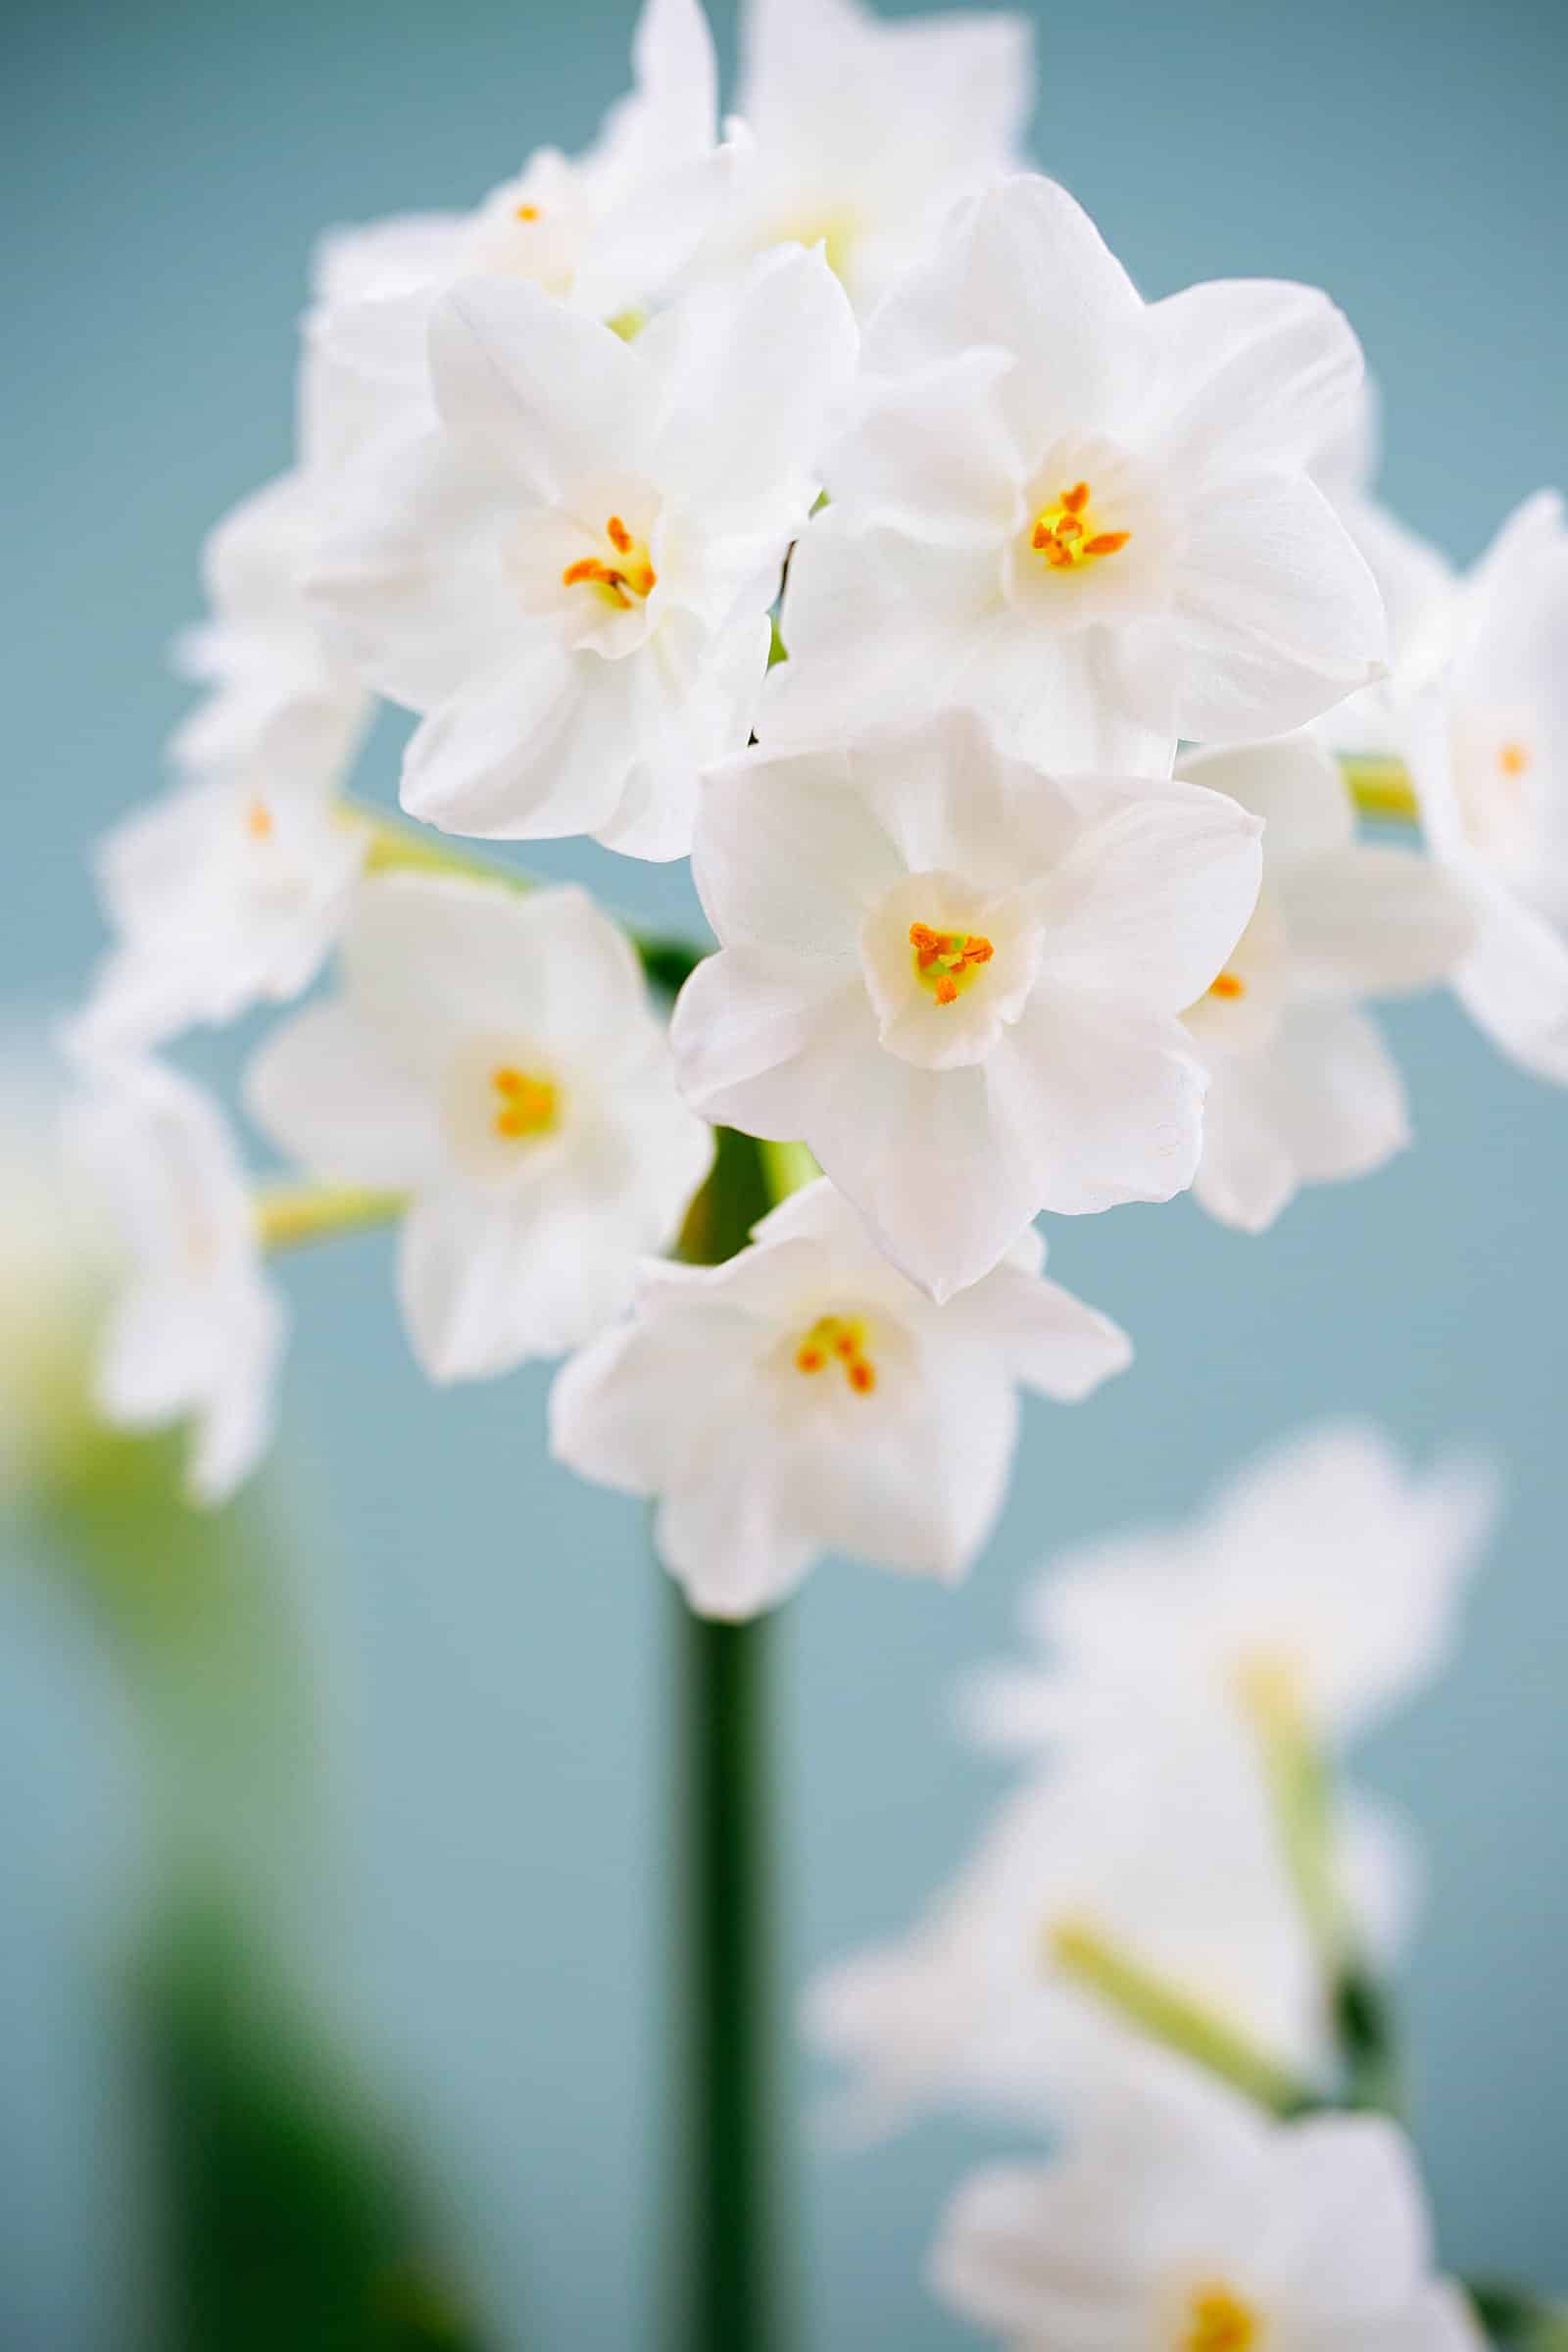 Closeup of a cluster of paperwhite (Narcissus) flowers